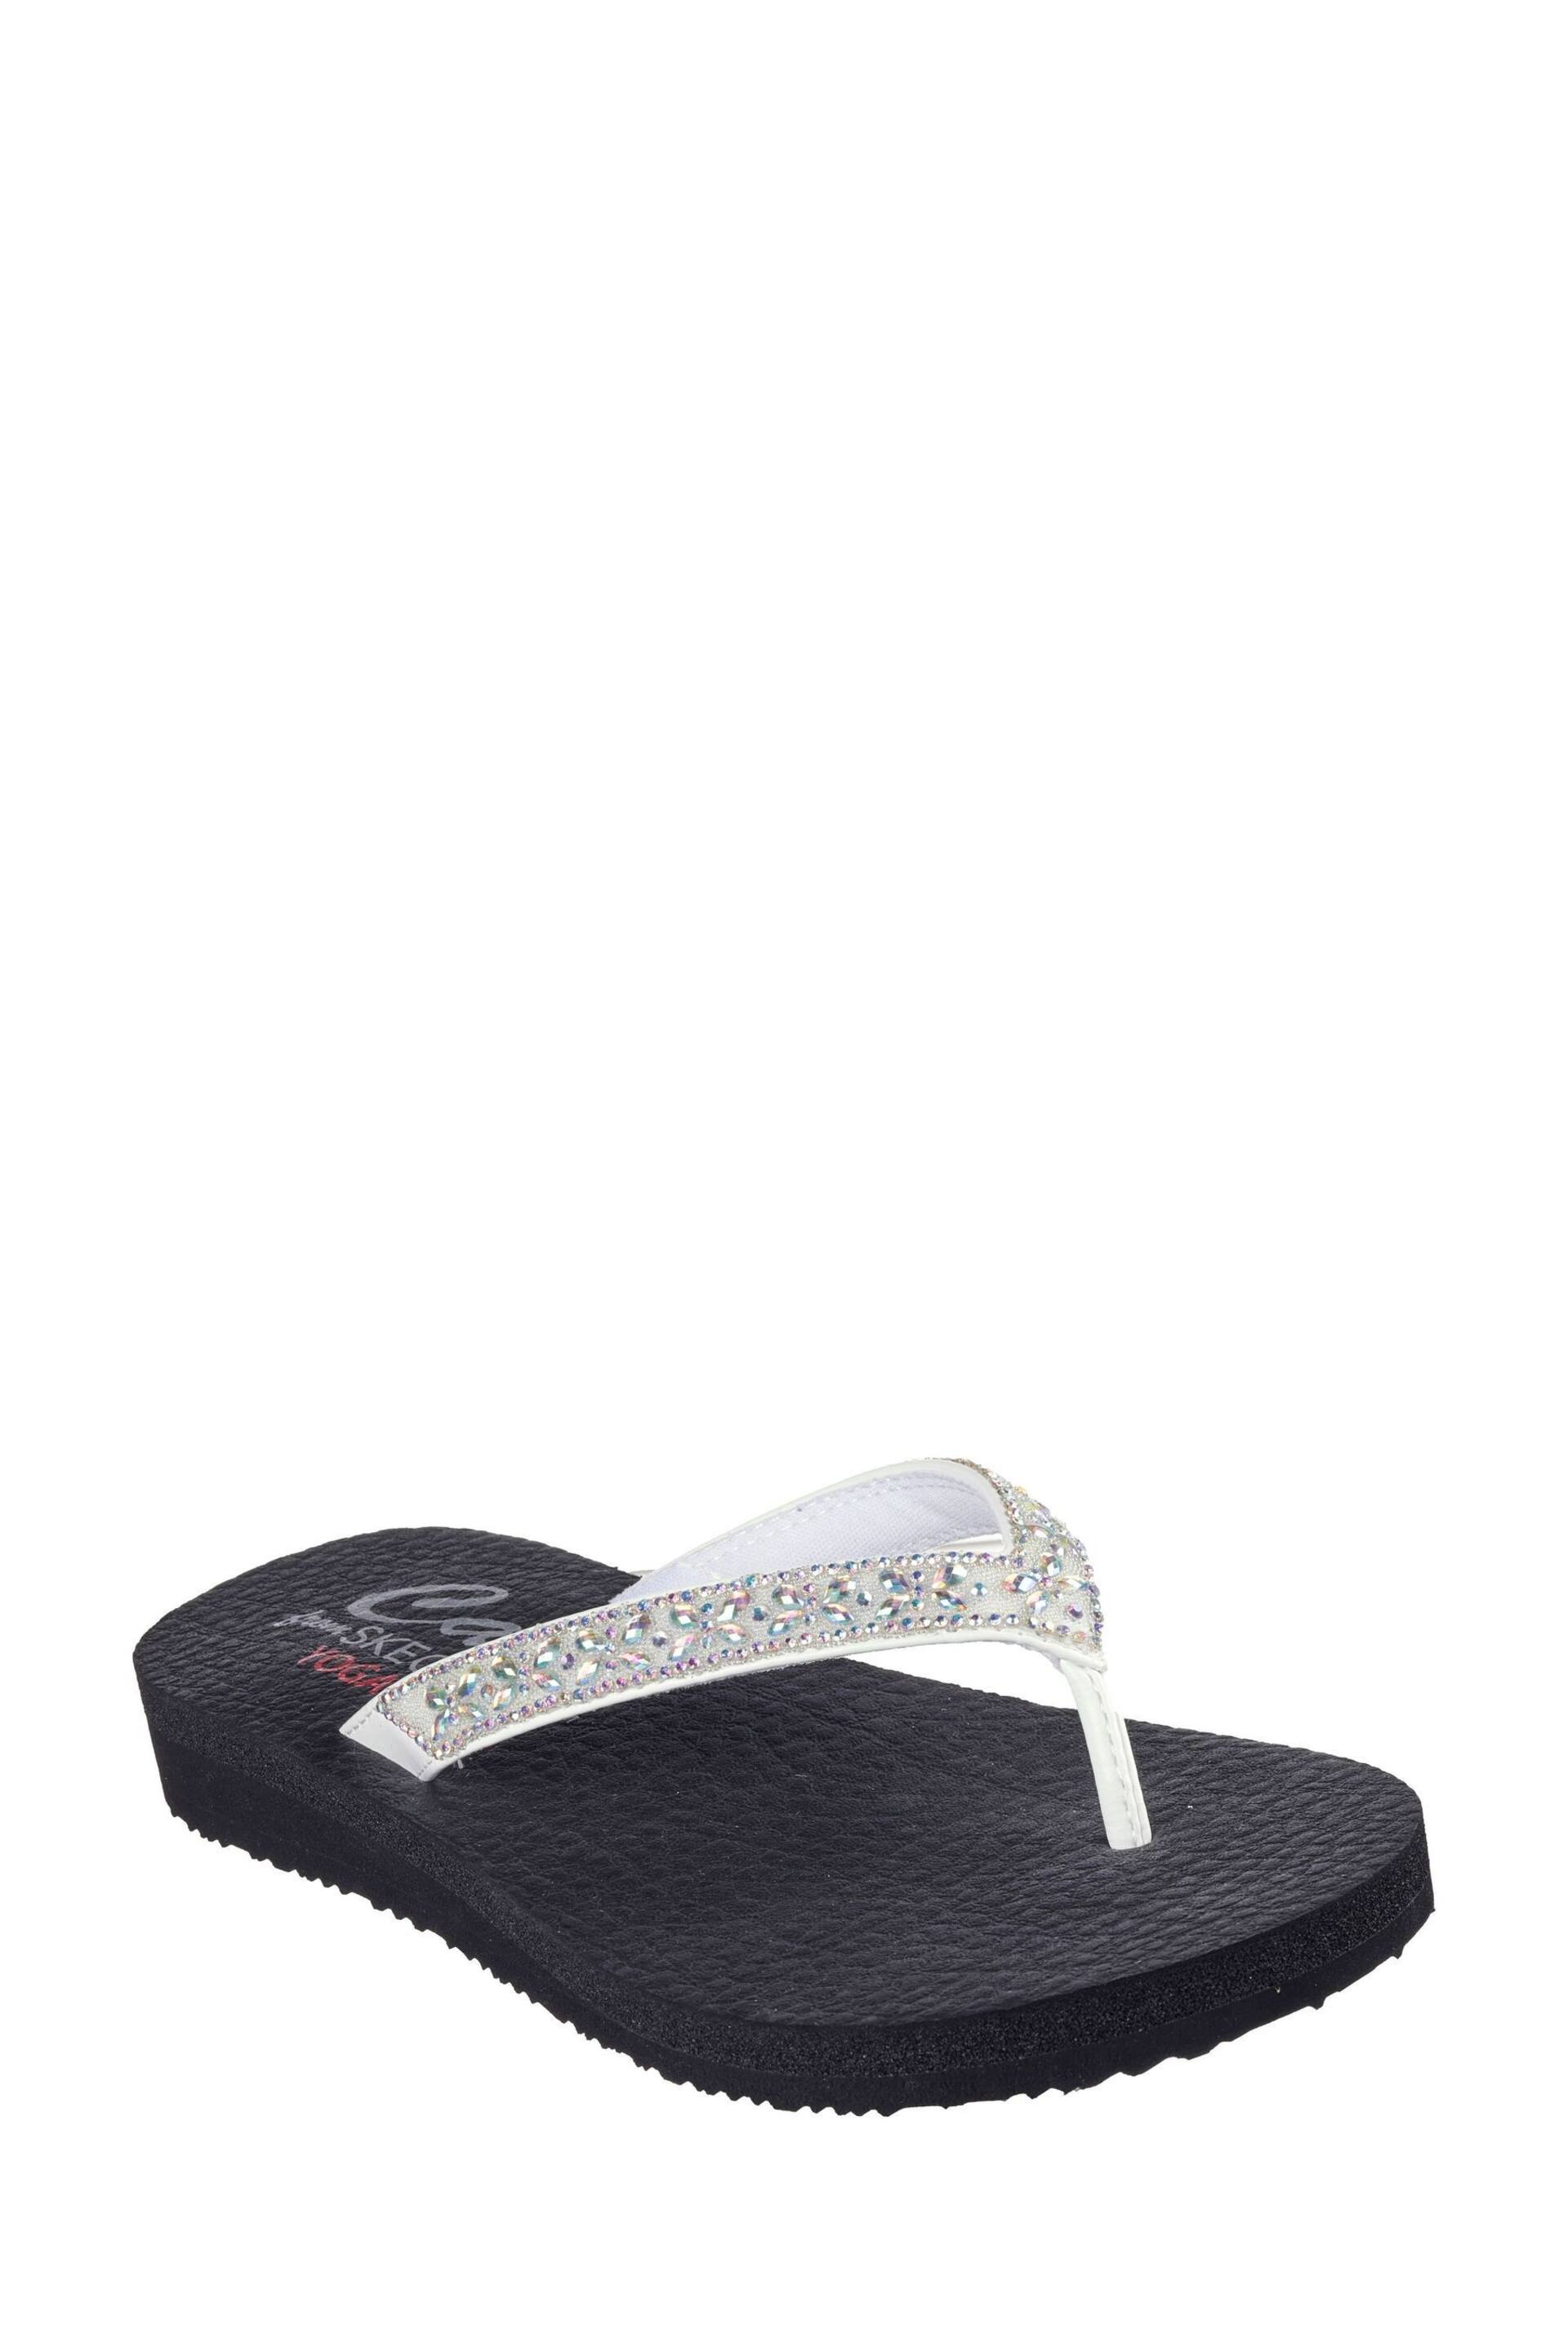 Skechers White Meditation Dancing Daisy Womens Sandals - Image 3 of 5